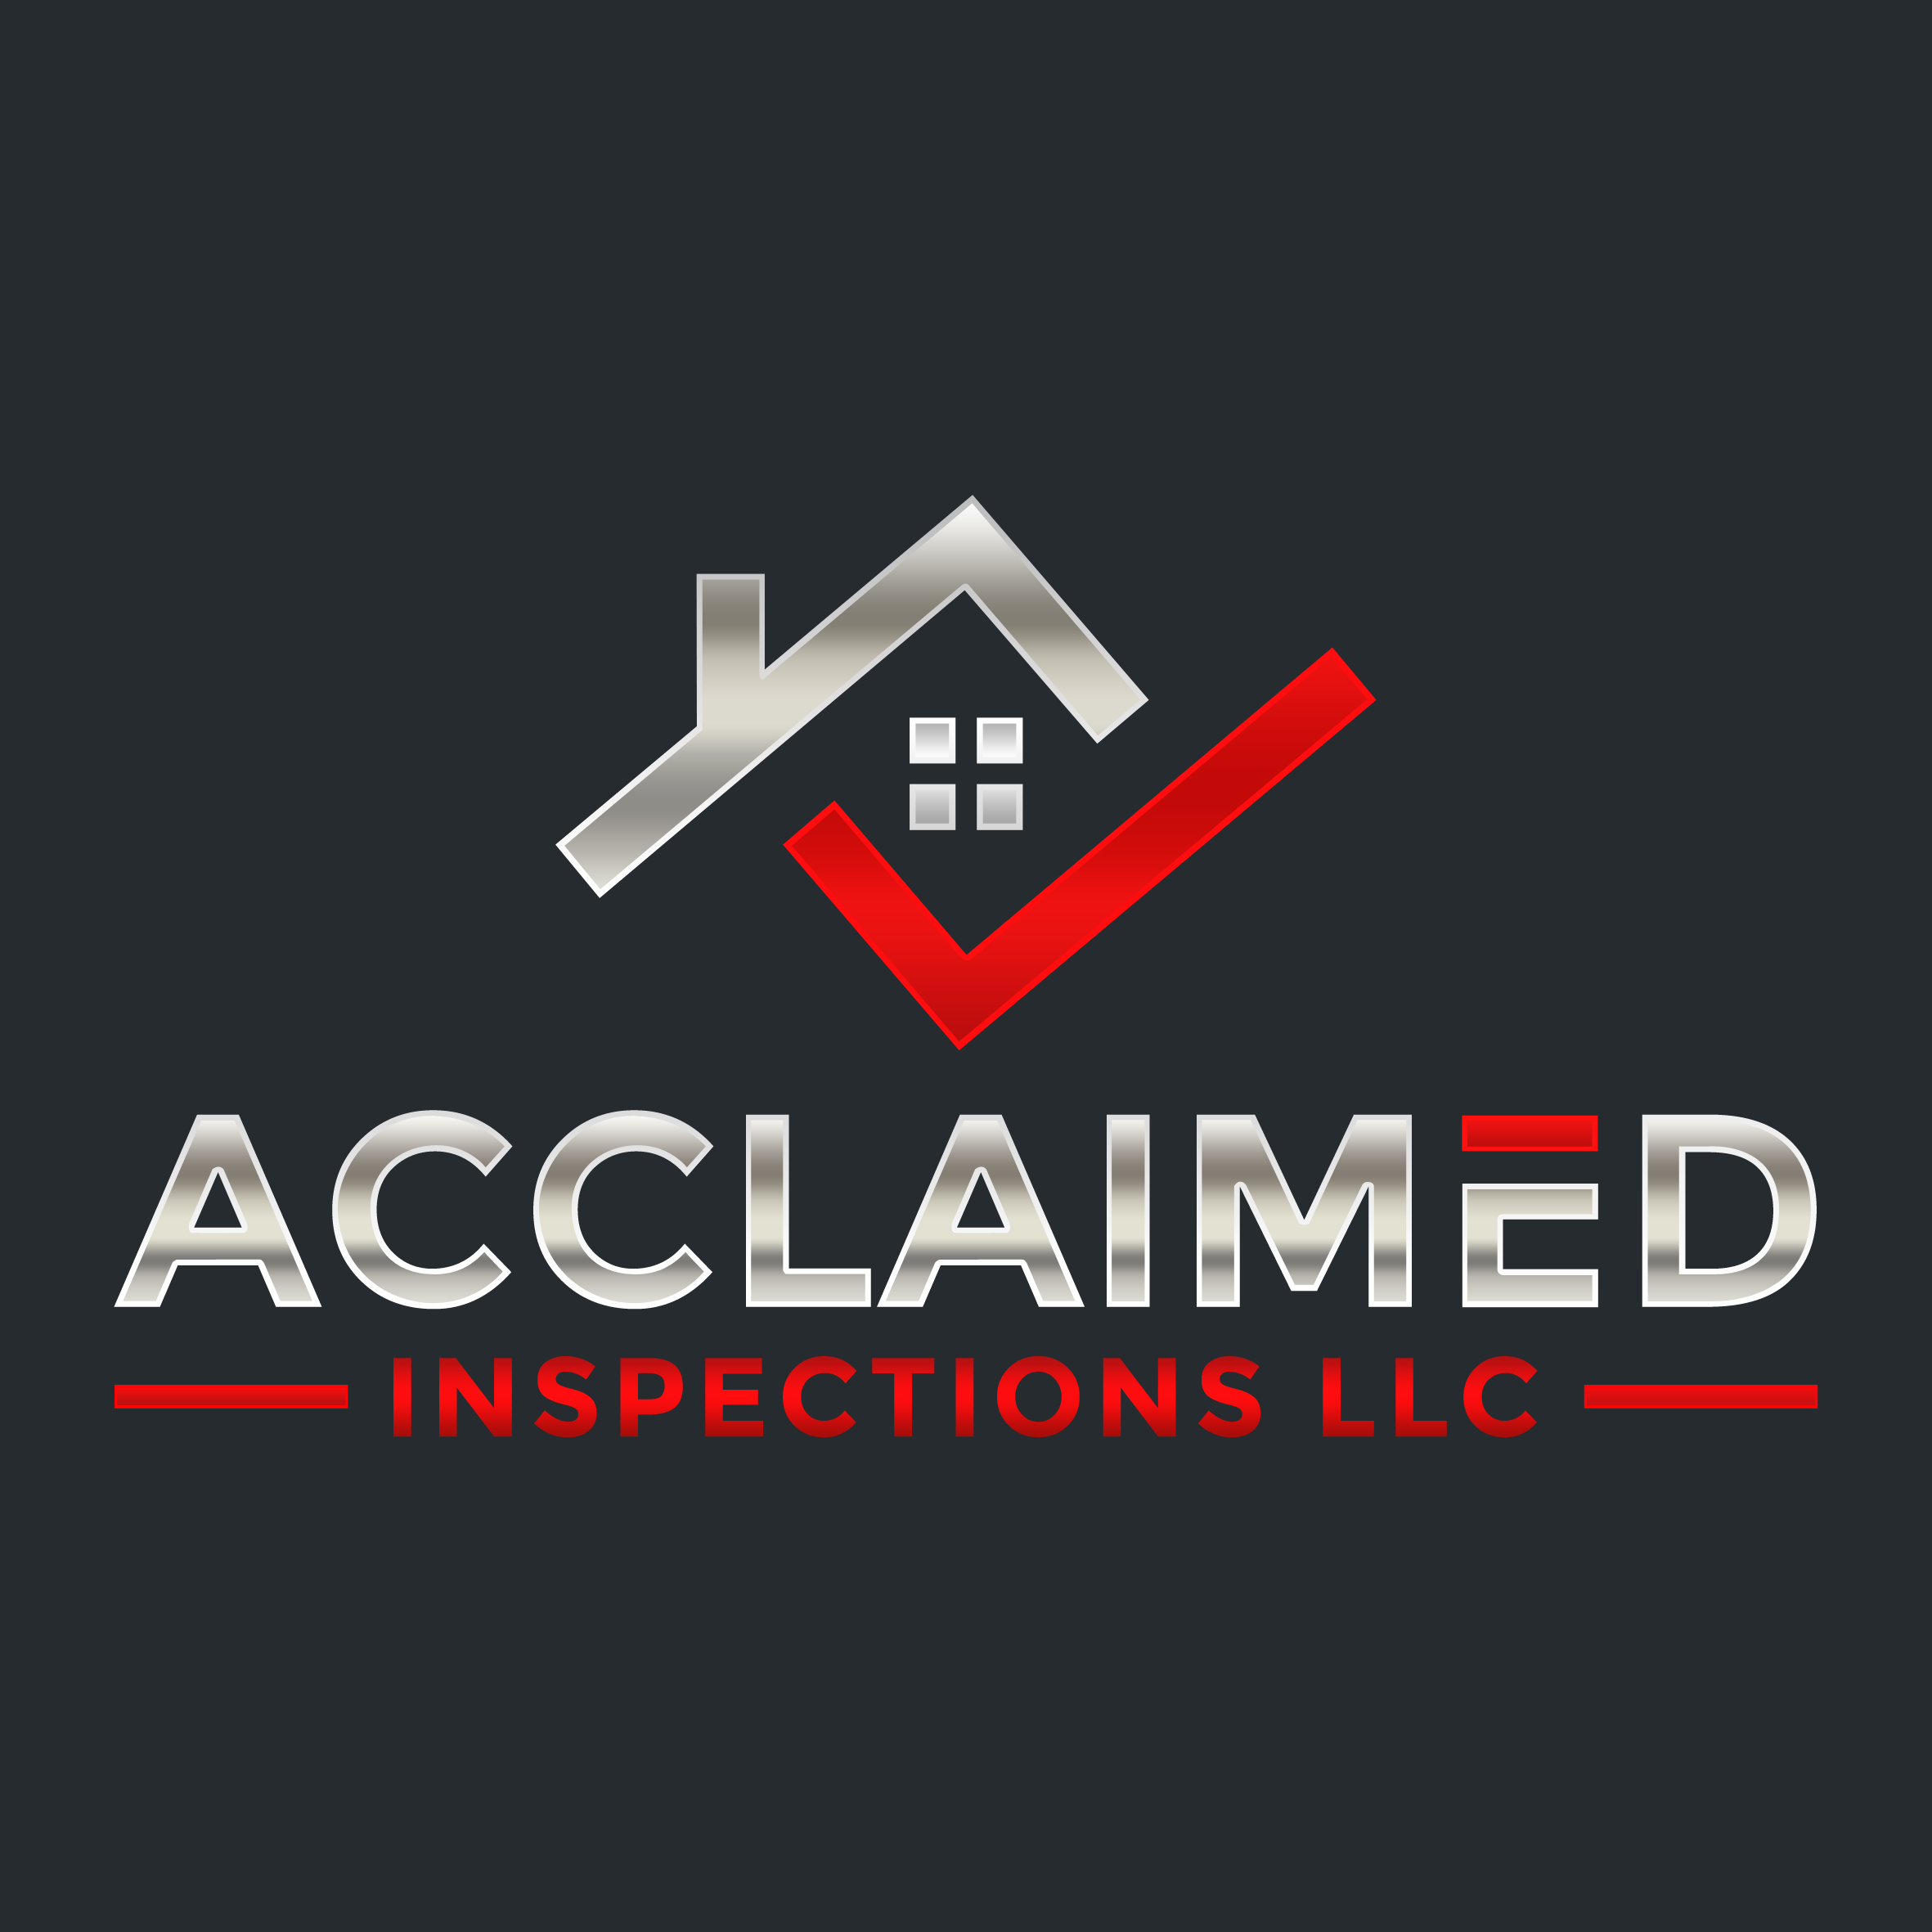 Acclaimed Inspections LLC